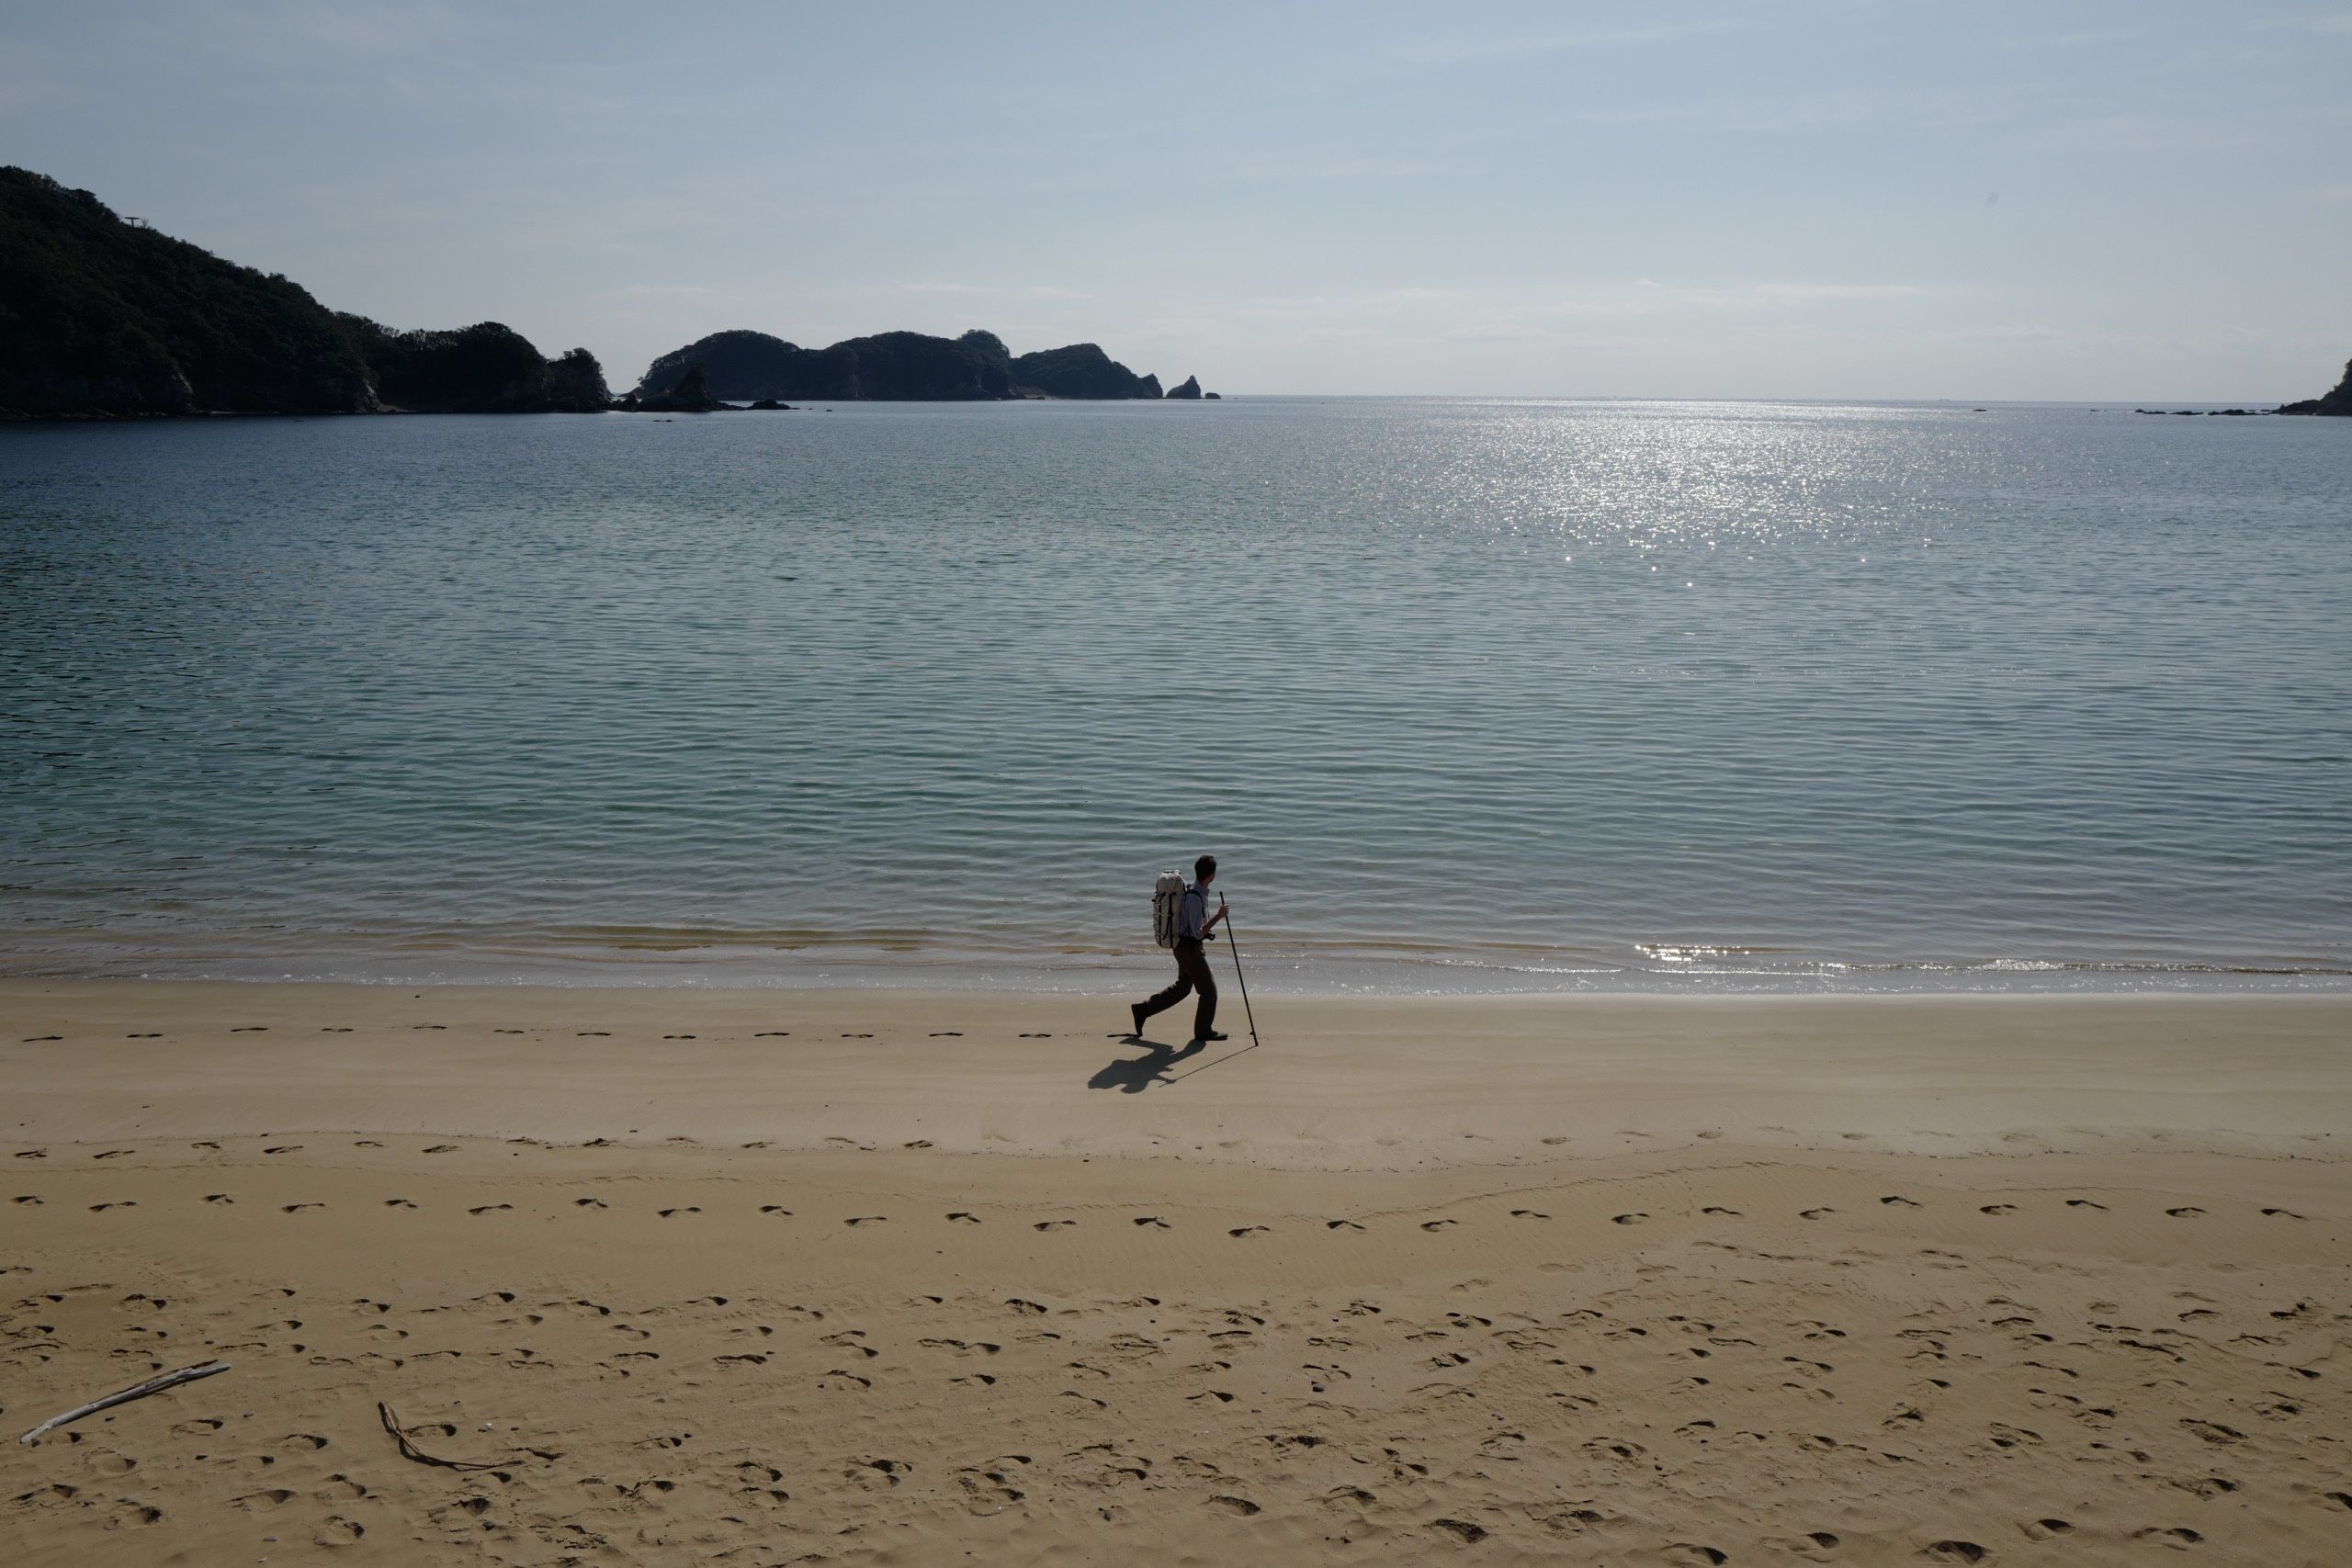 Panorama of a sandy beach with a man, the author, walking along the sea, carrying a rucksack and a walking stick.